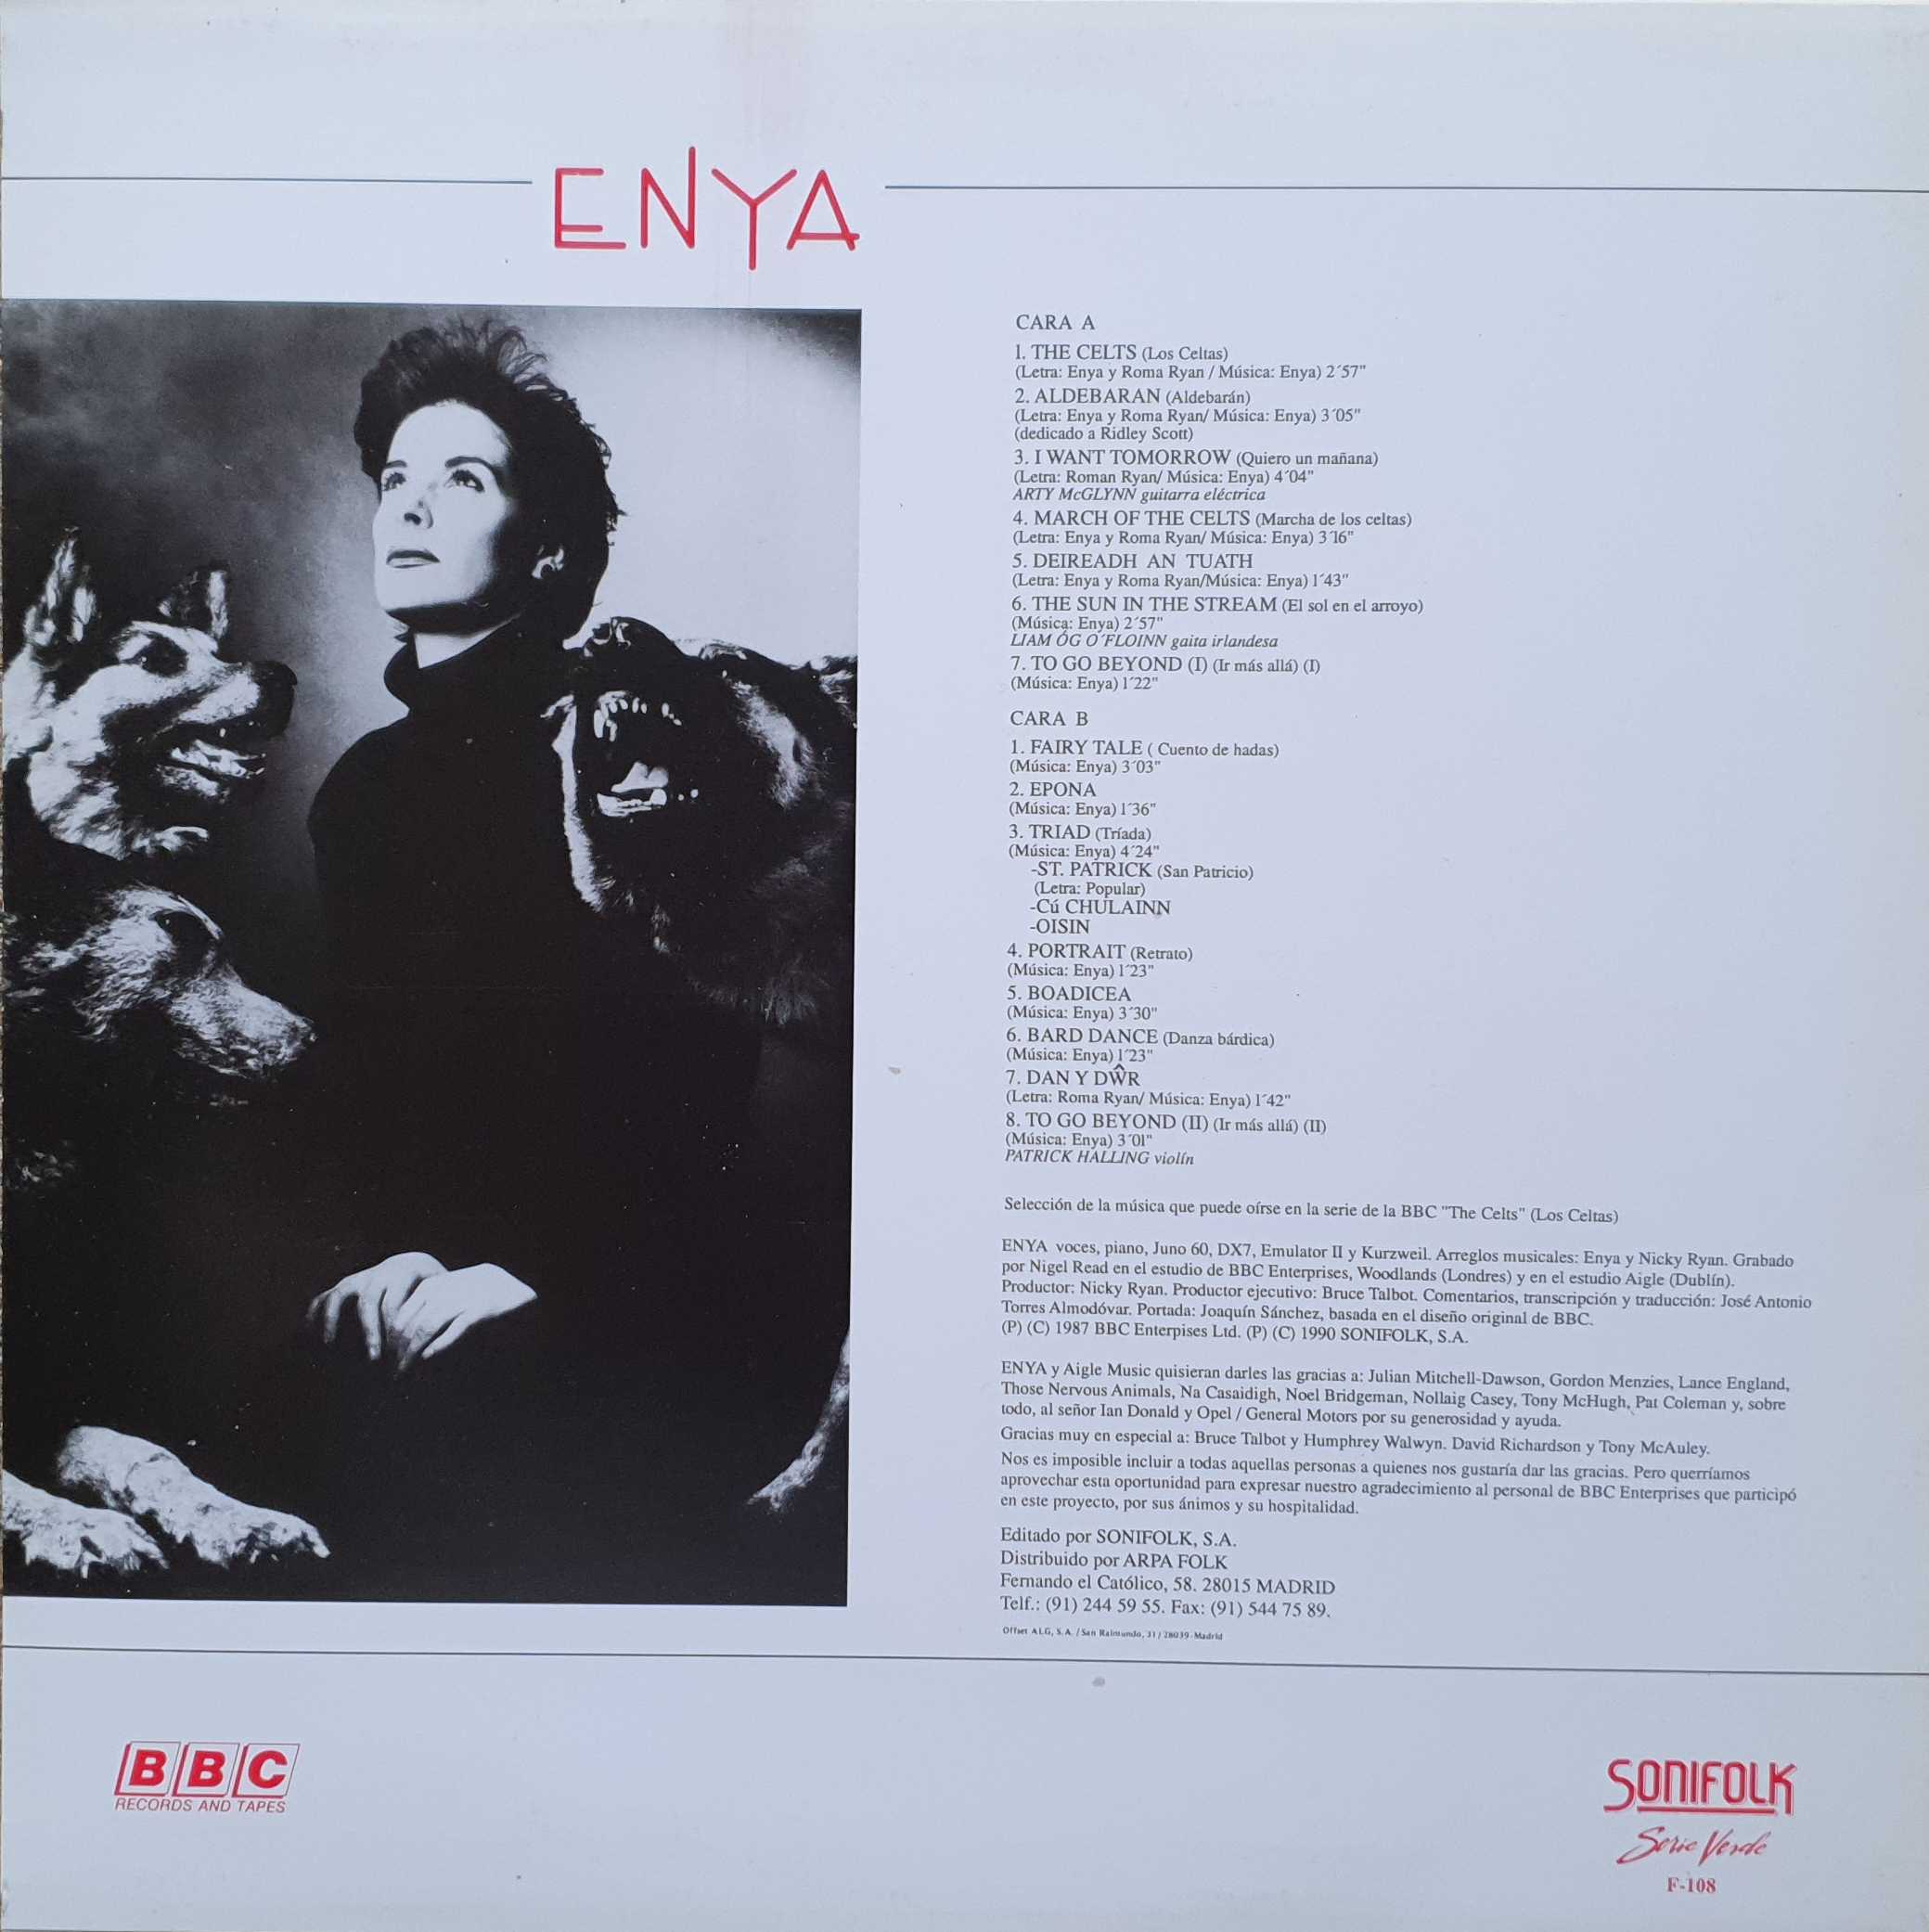 Picture of F - 108 Enya by artist Enya from the BBC records and Tapes library